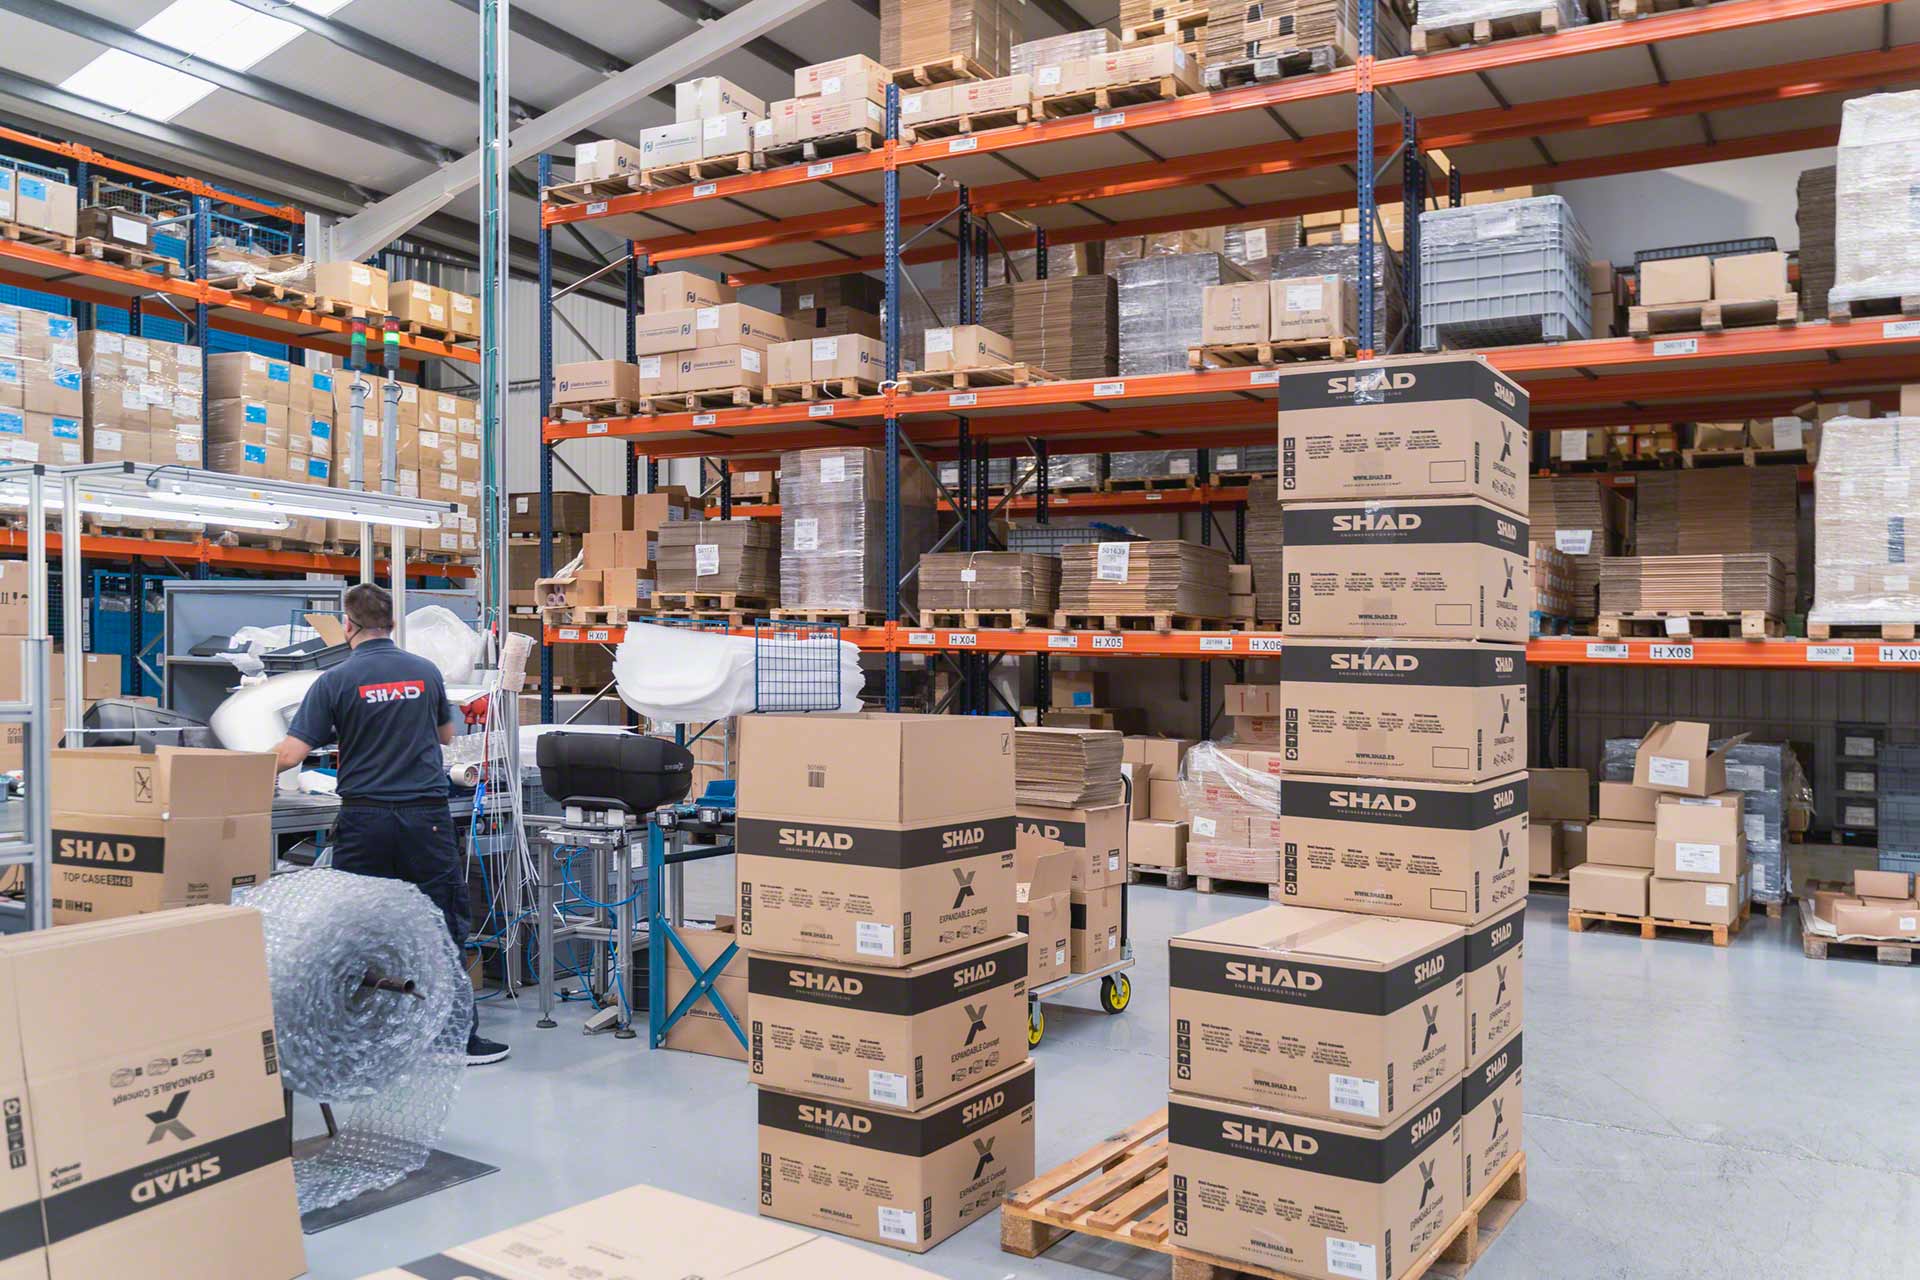 Flexible fulfillment makes it possible to dispatch orders from any warehouse